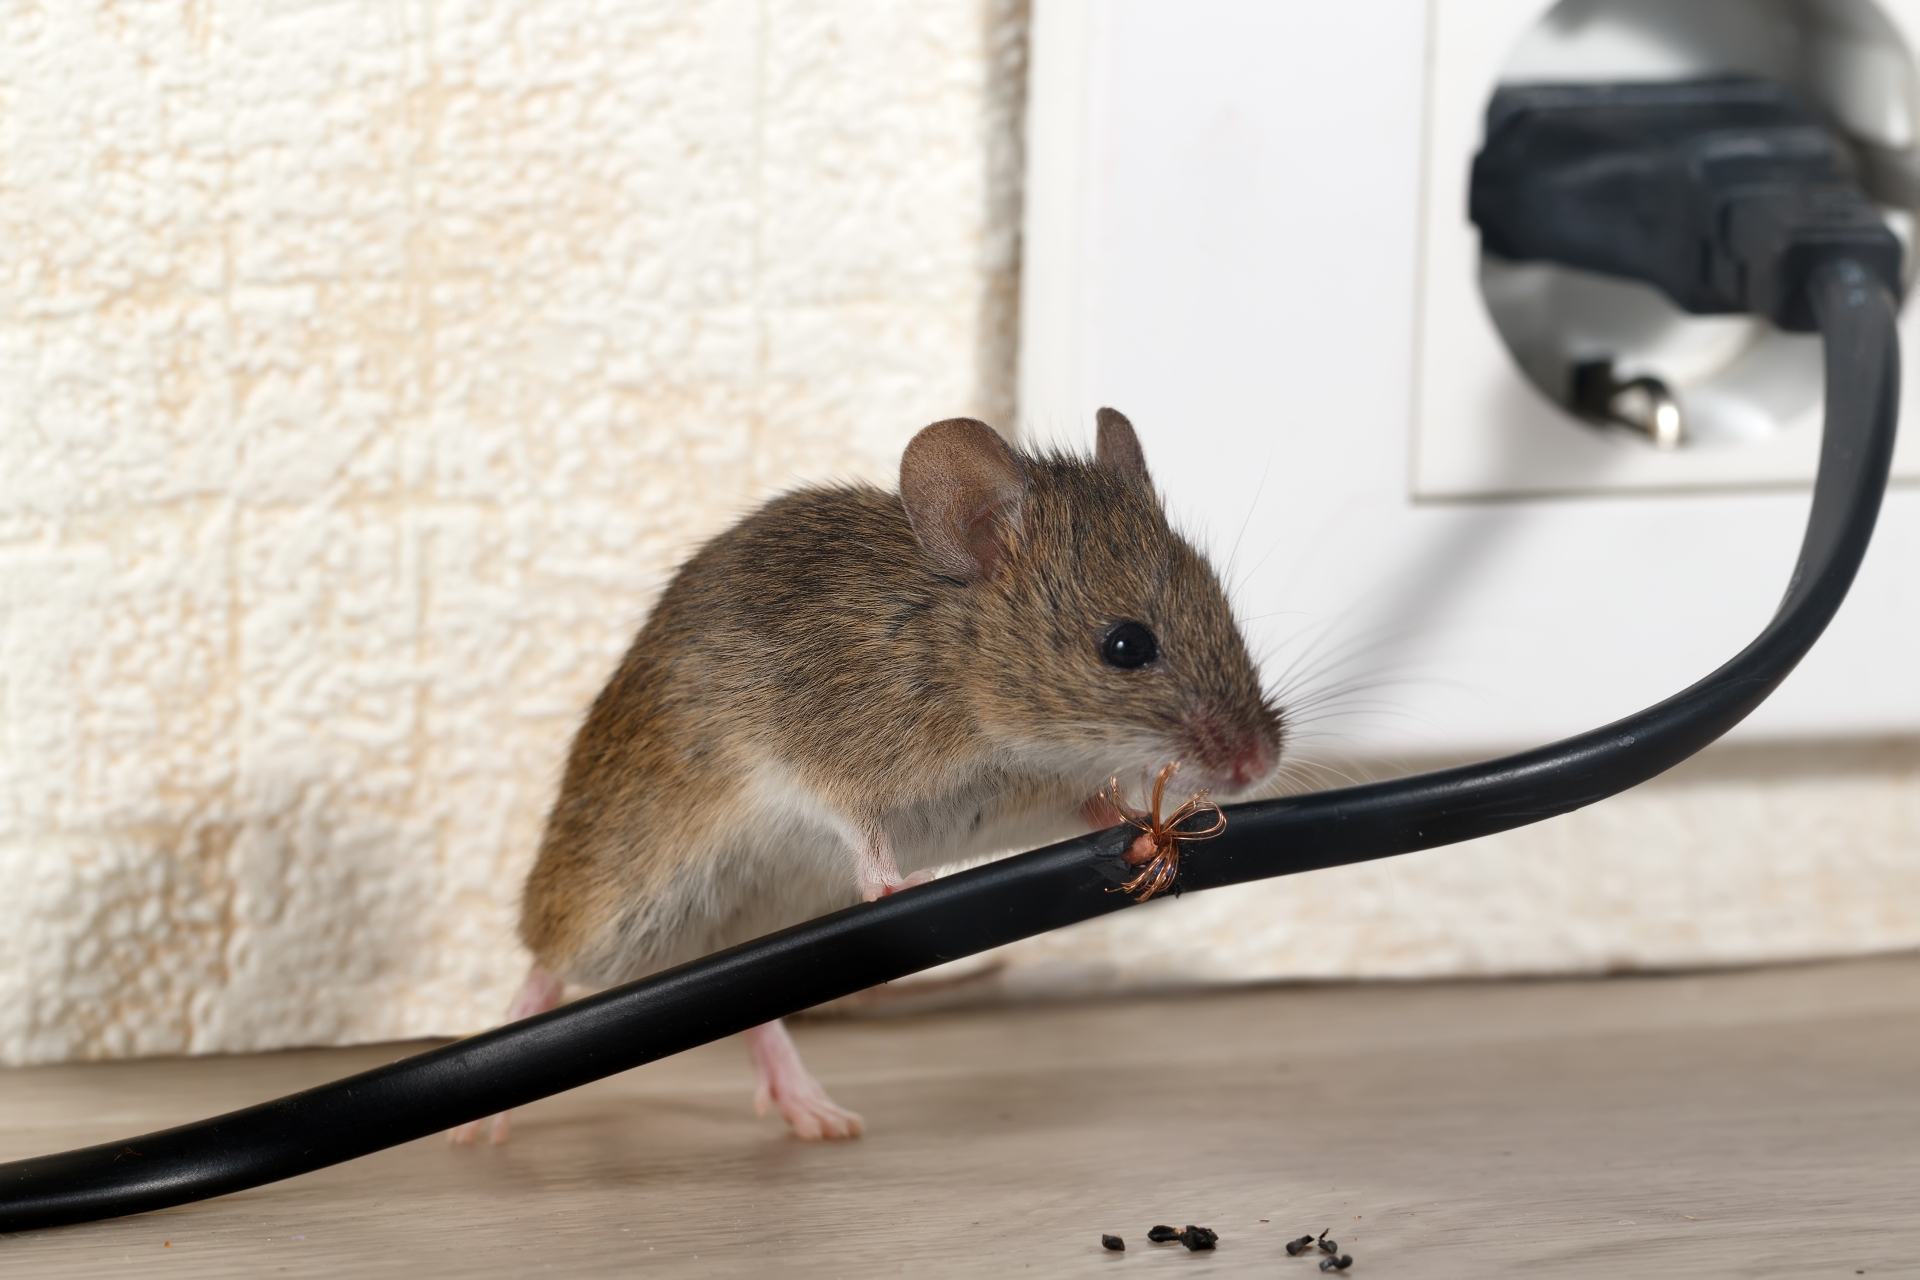 Mice Infestation, Pest Control in Hornsey, N8. Call Now 020 8166 9746